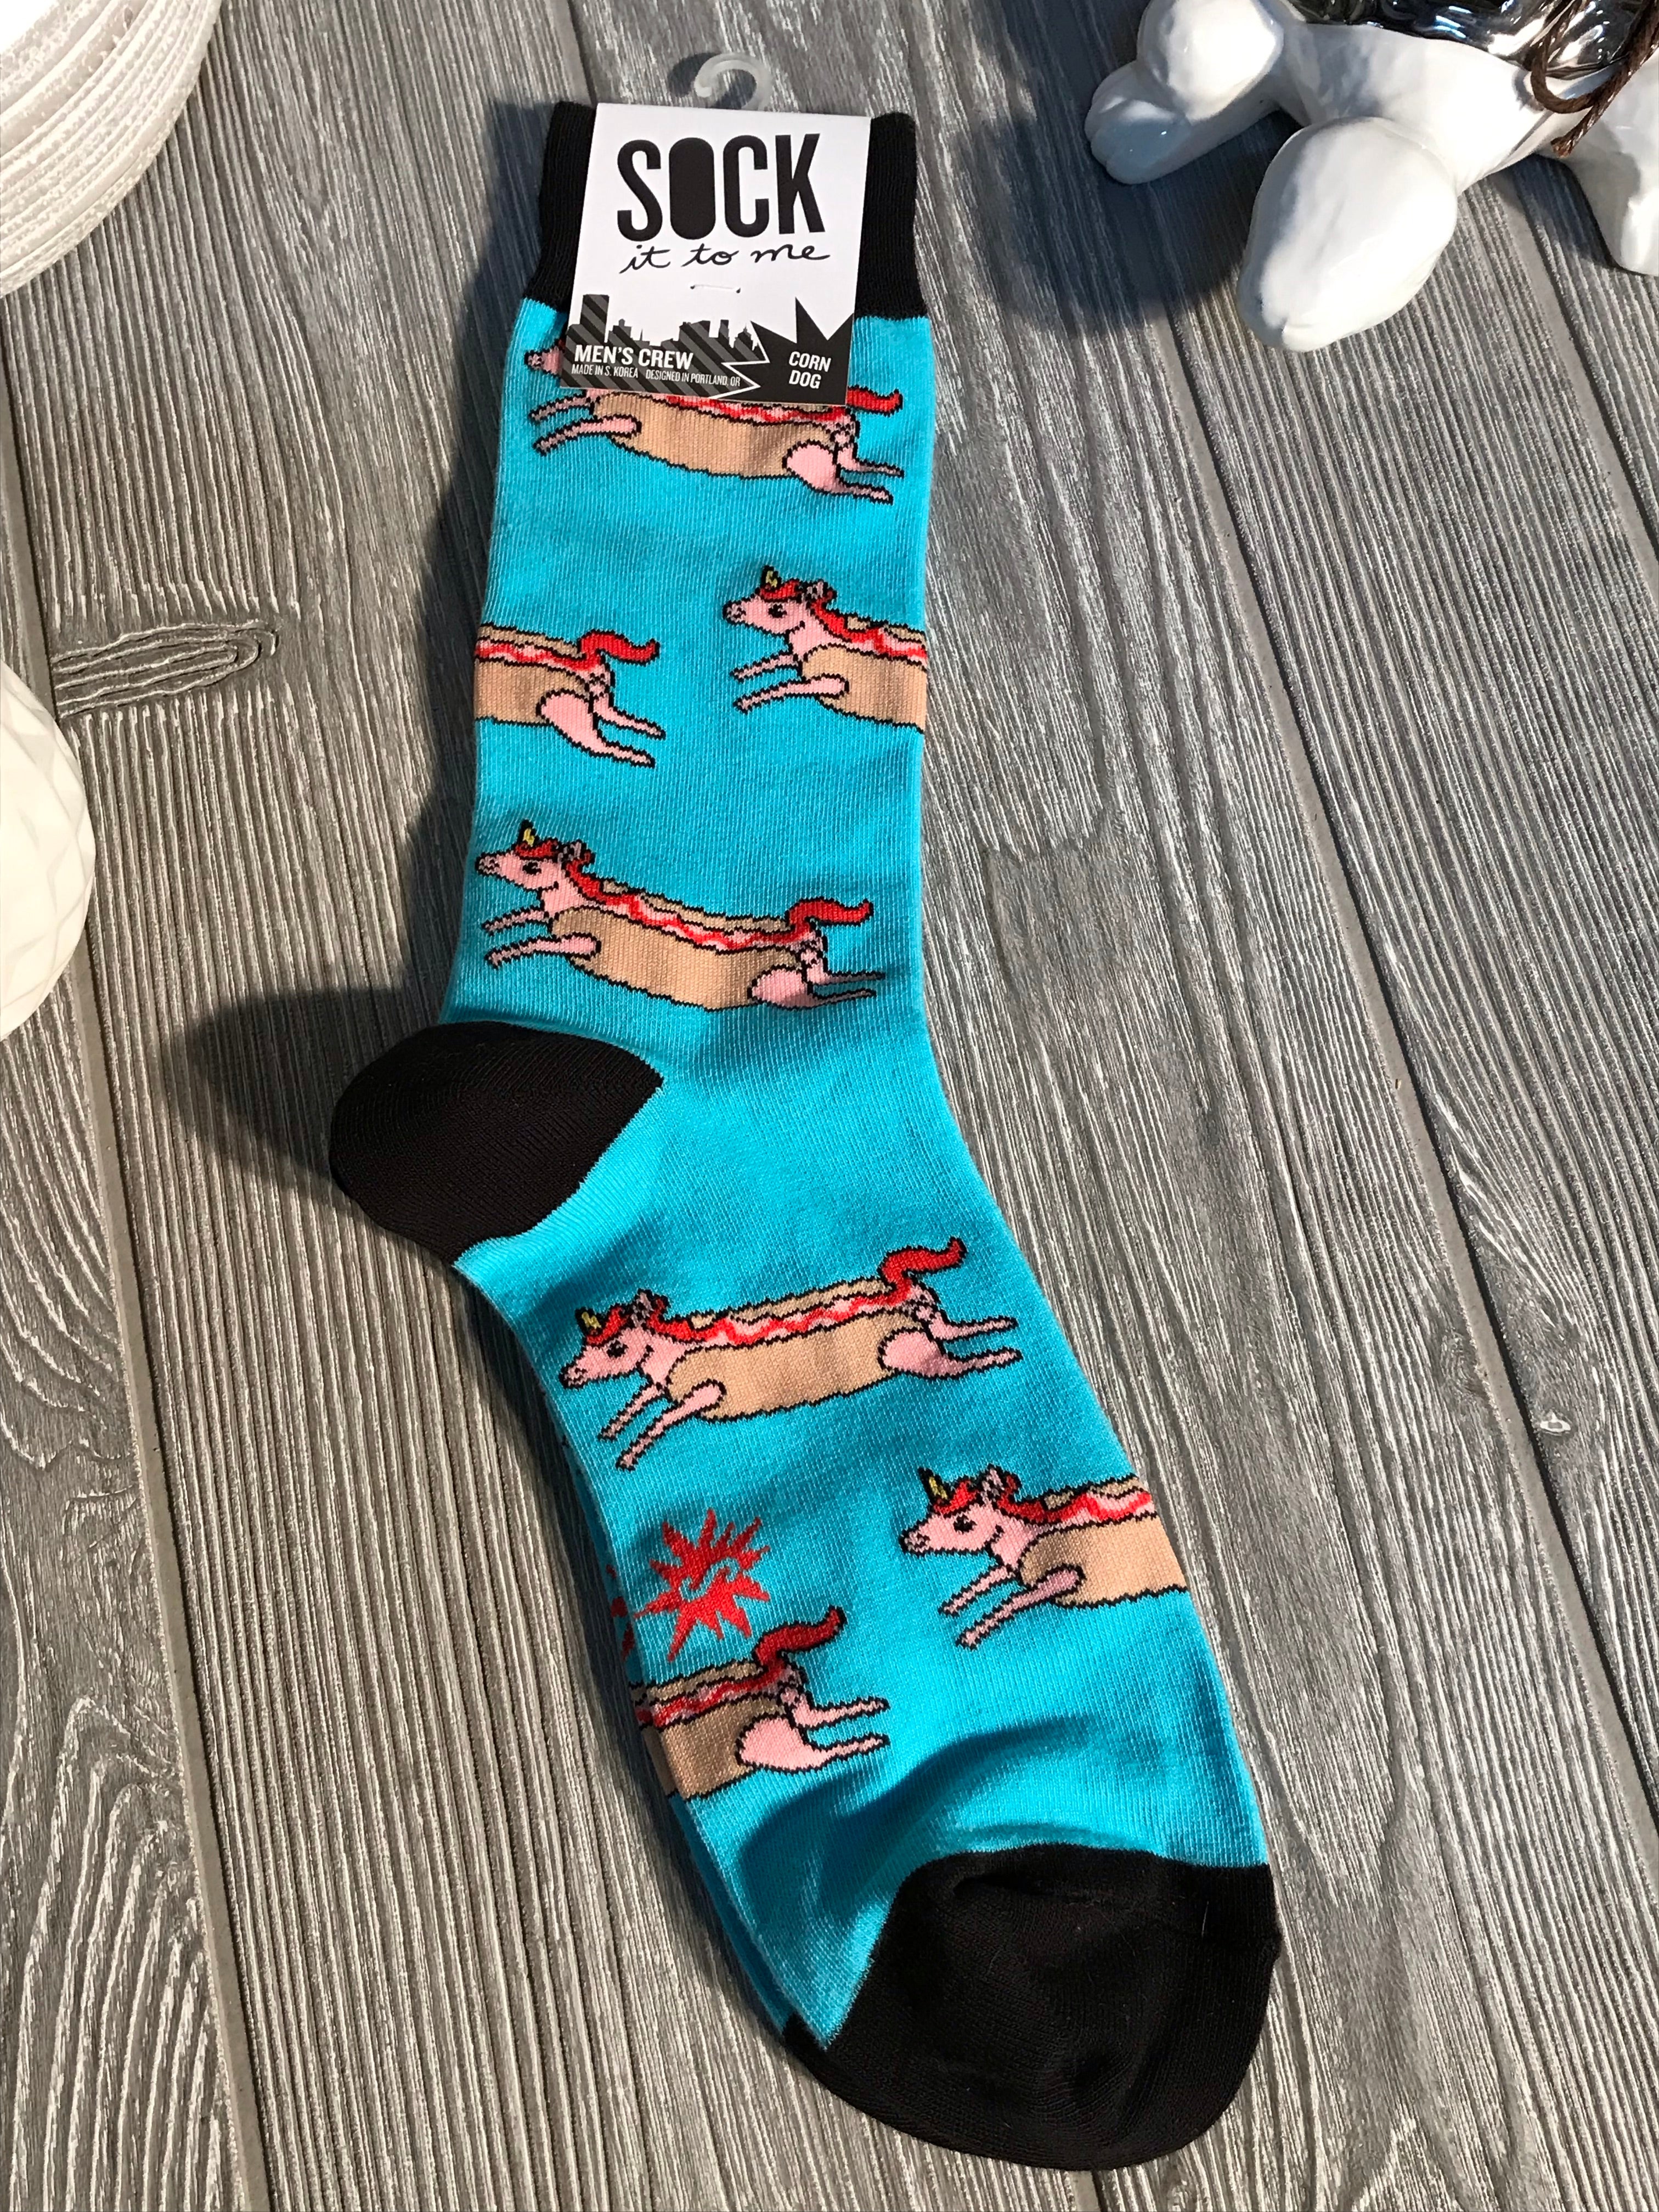 Sock It To Me Socks  Funny Socks With Cats, Unicorns & More